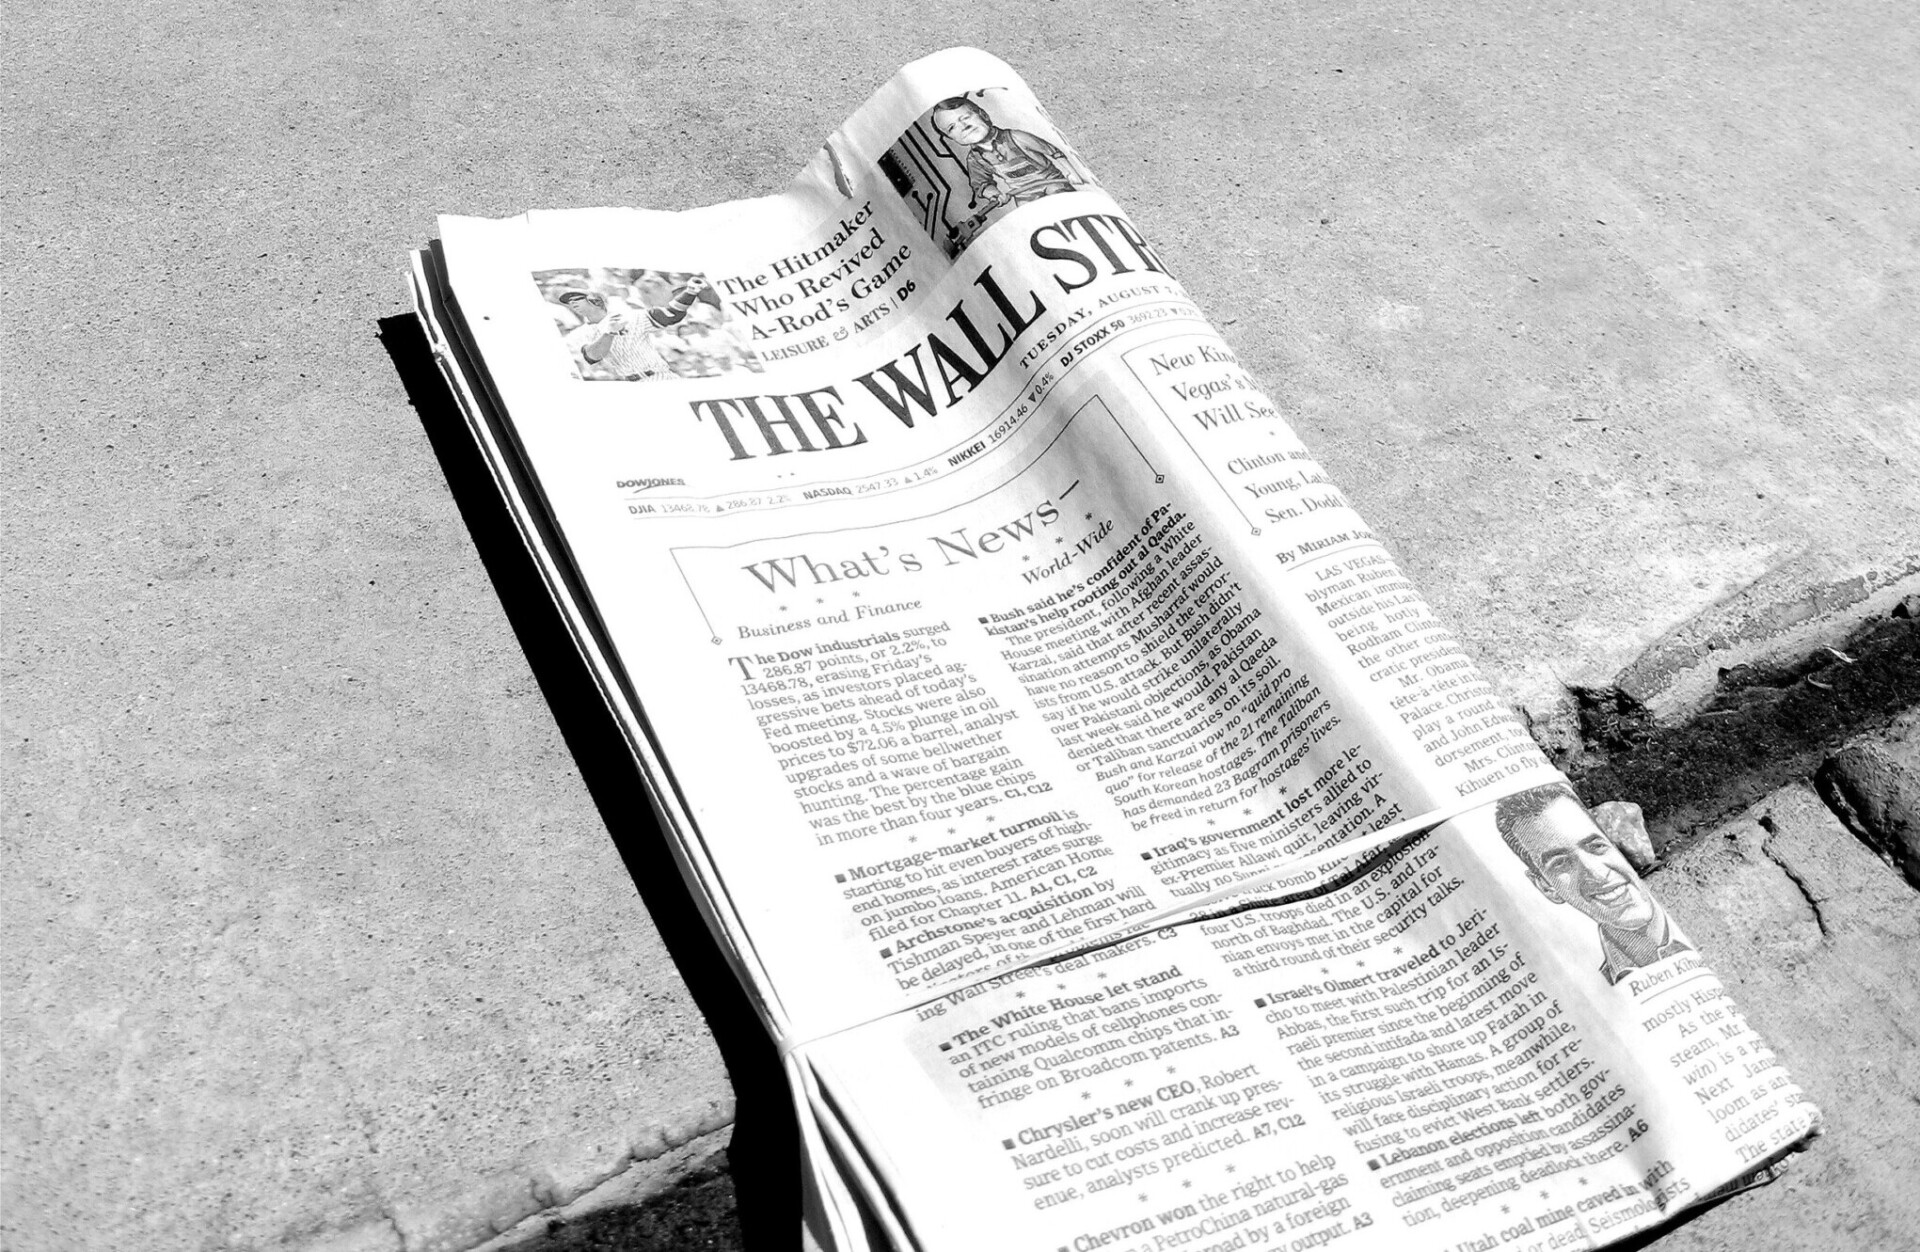 "Wall Street Journal" by kevin dooley is licensed under CC BY 2.0.